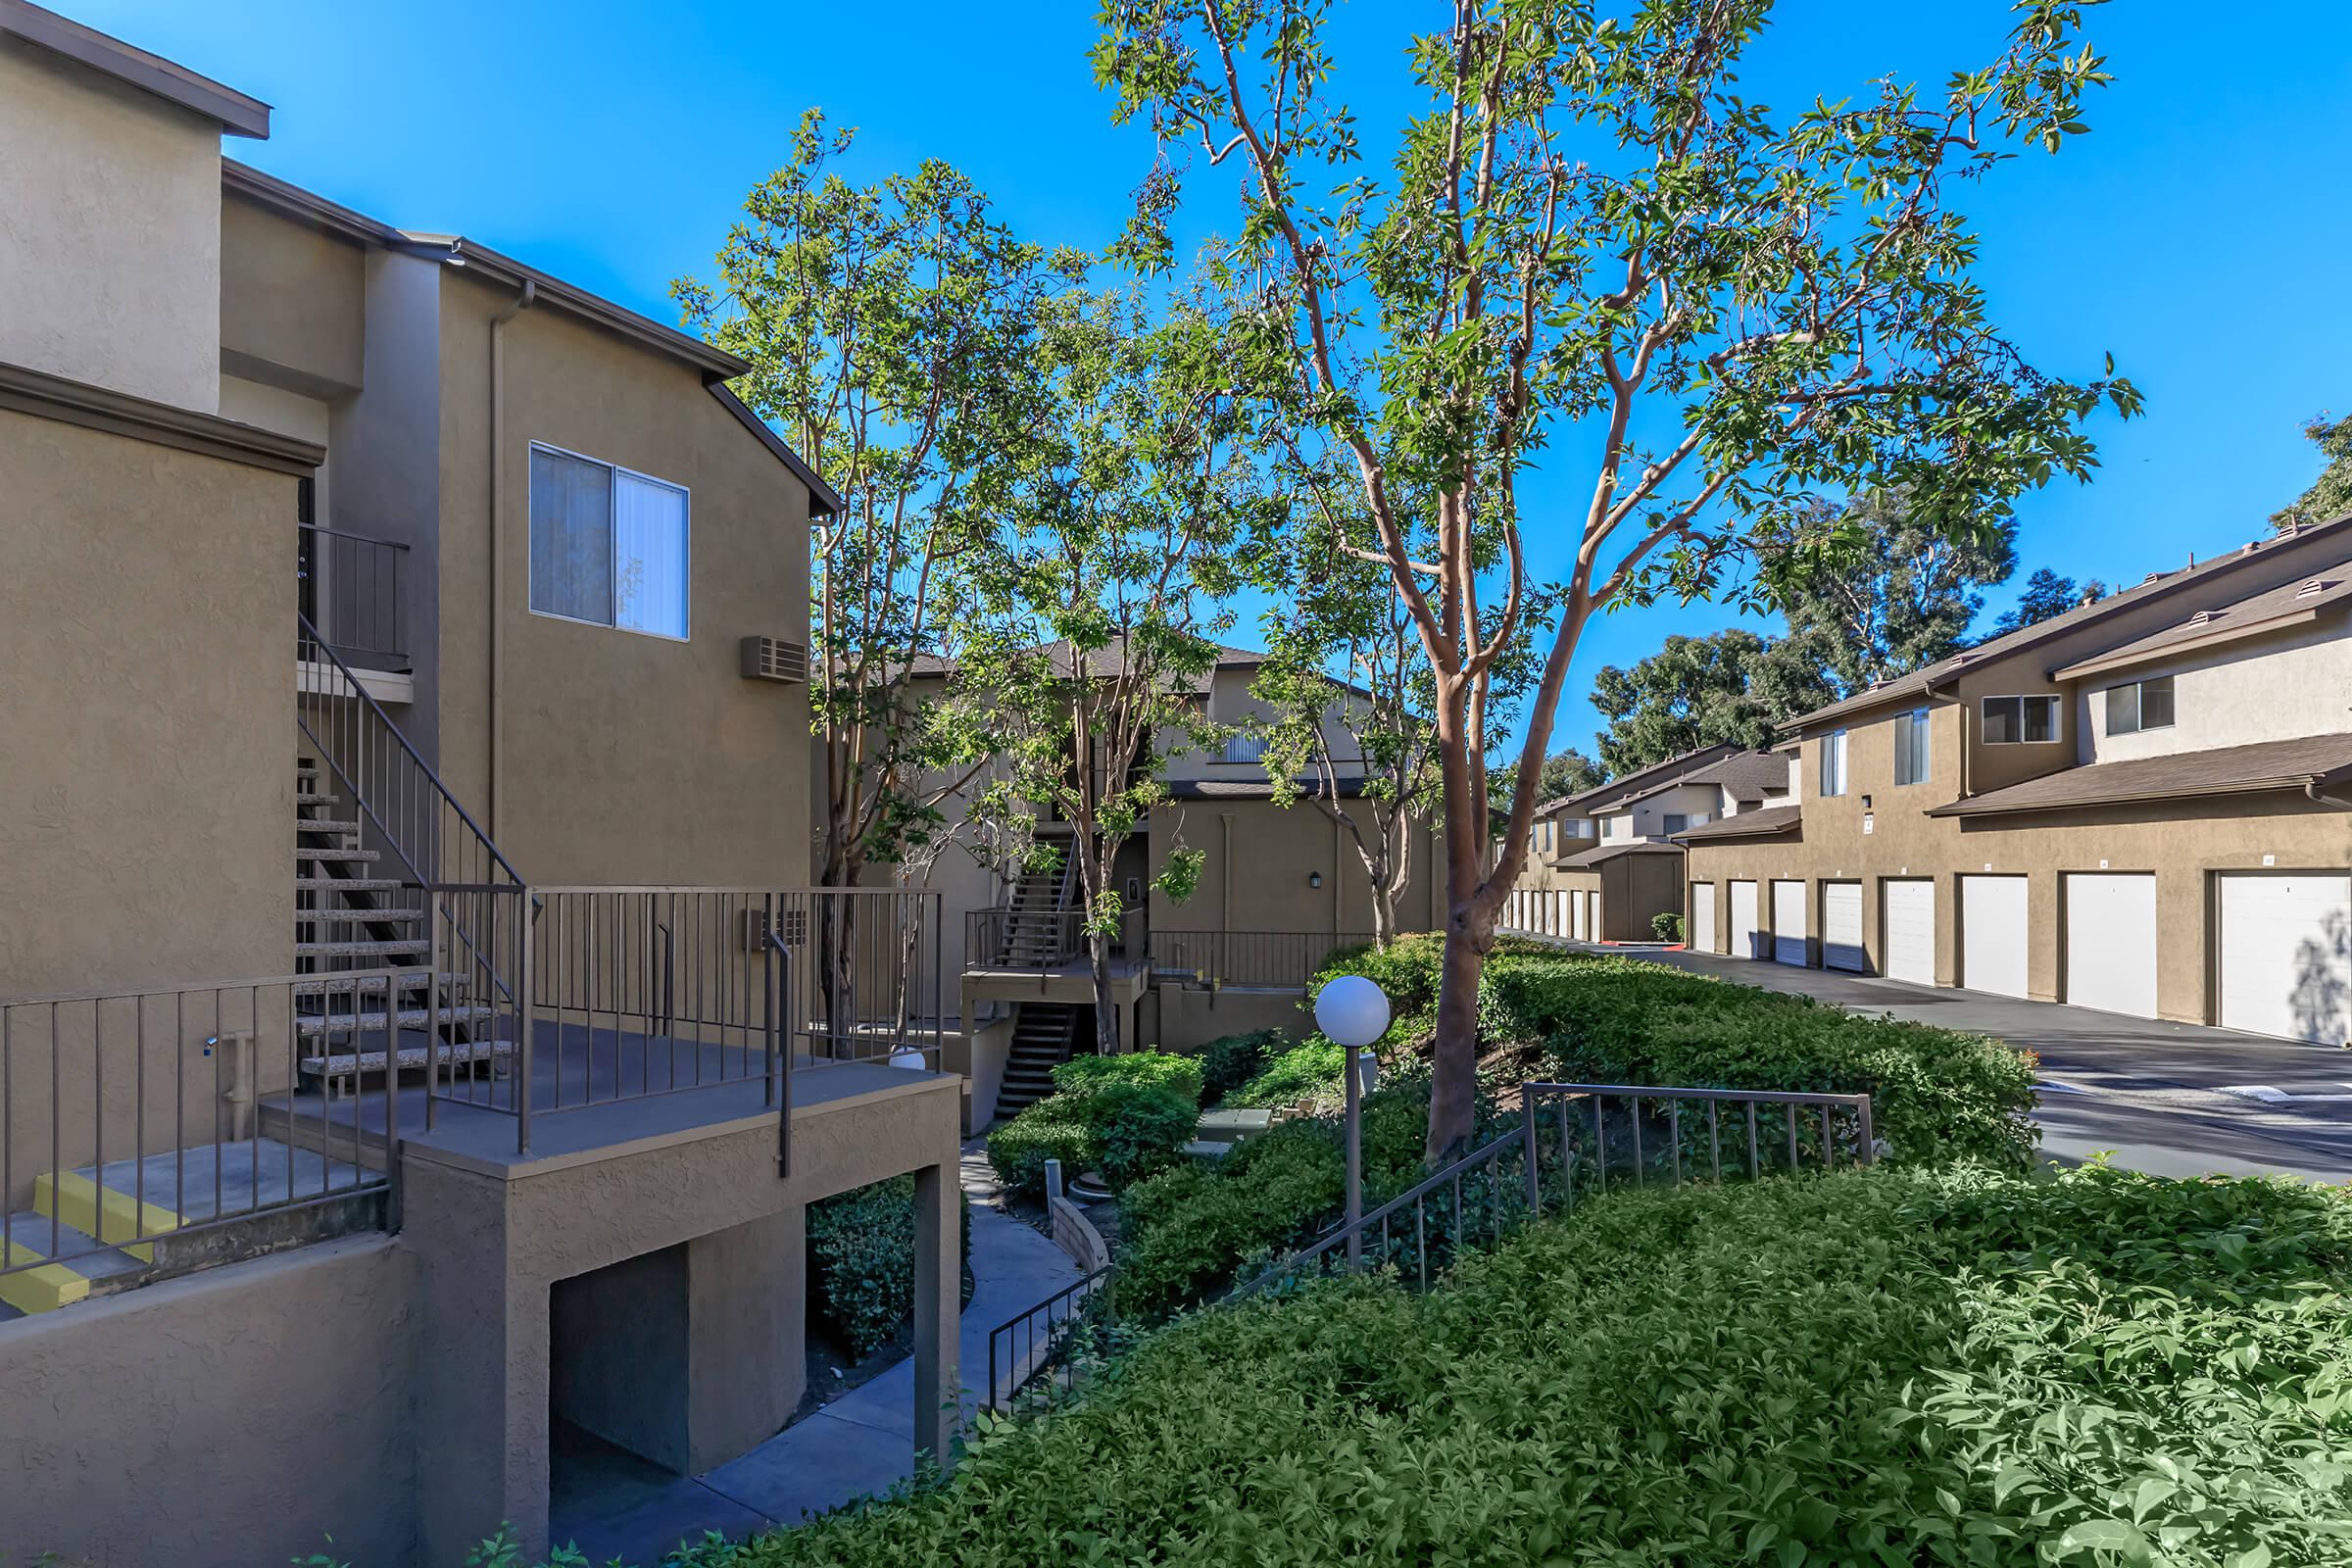 Trabuco Woods Apartment Homes community buildings with green shrubs